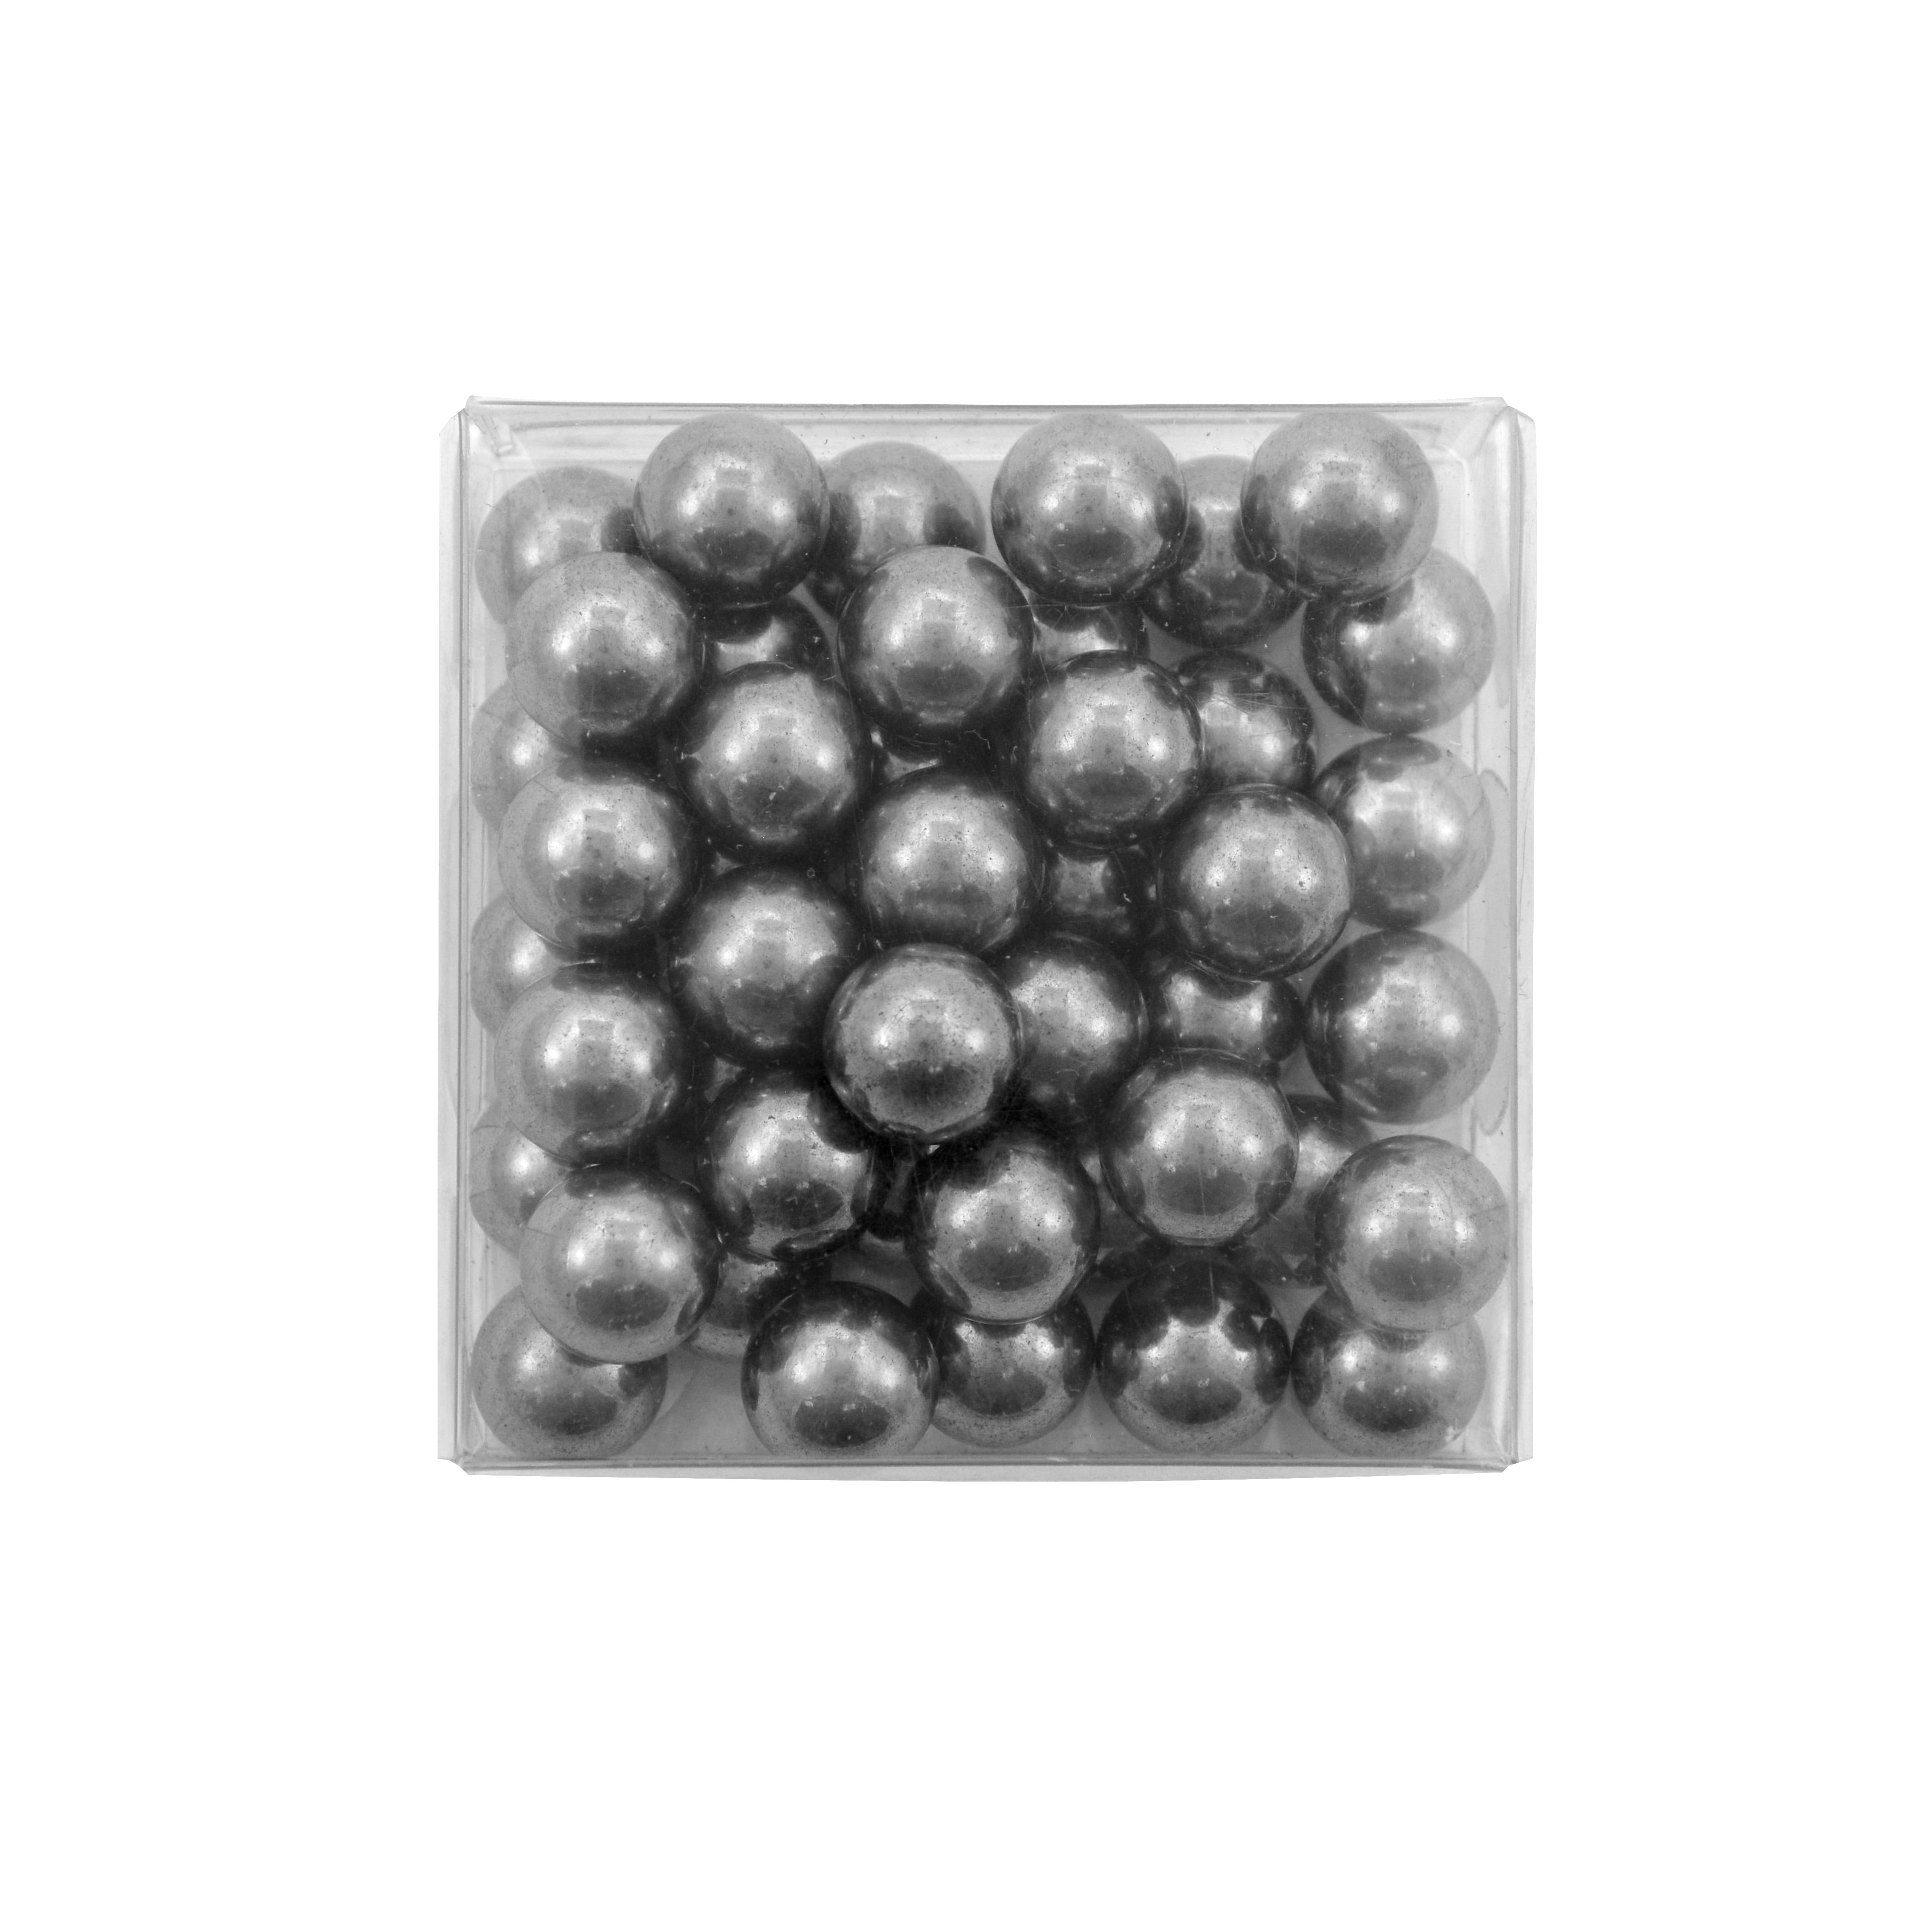 Four Brothers High-Performance 1/2 inch Target Slingshot Steel Ammo Balls 